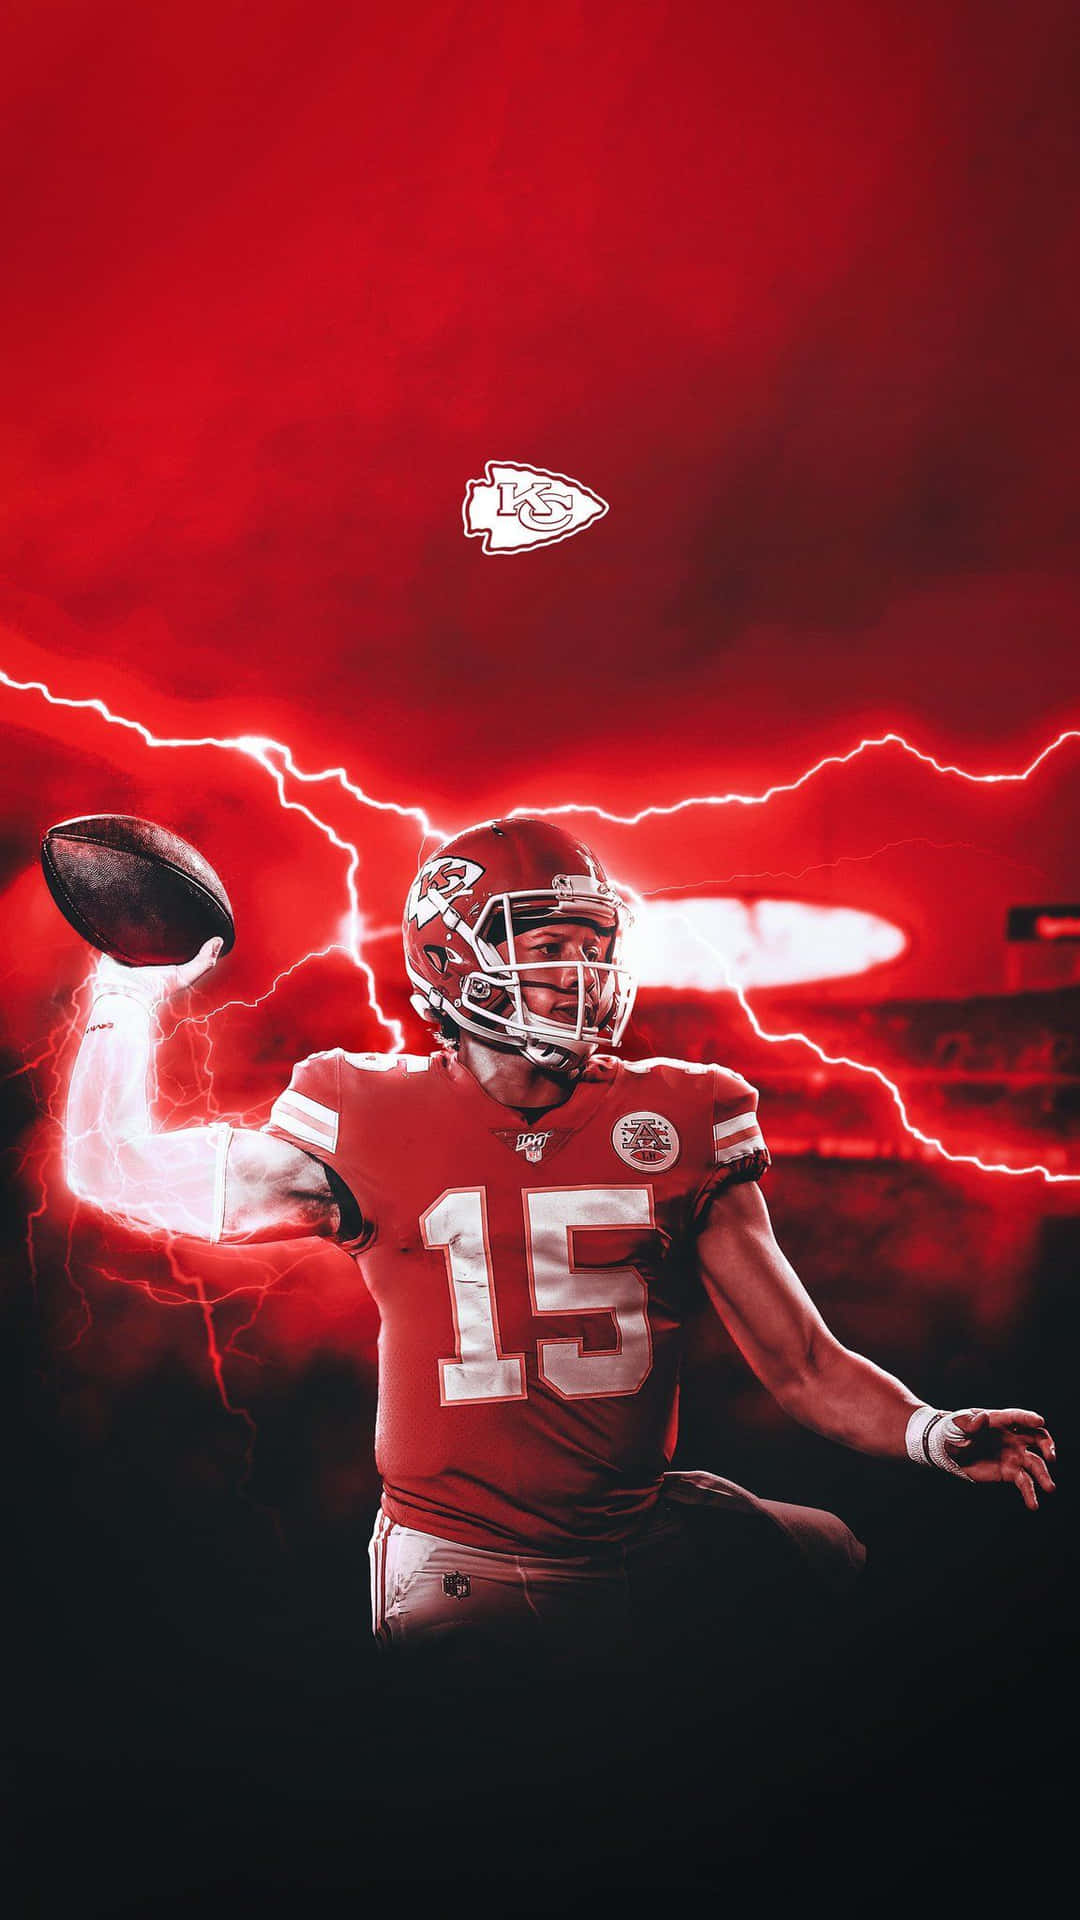 Patrick Mahomes Cool Fanart With Red Thunder